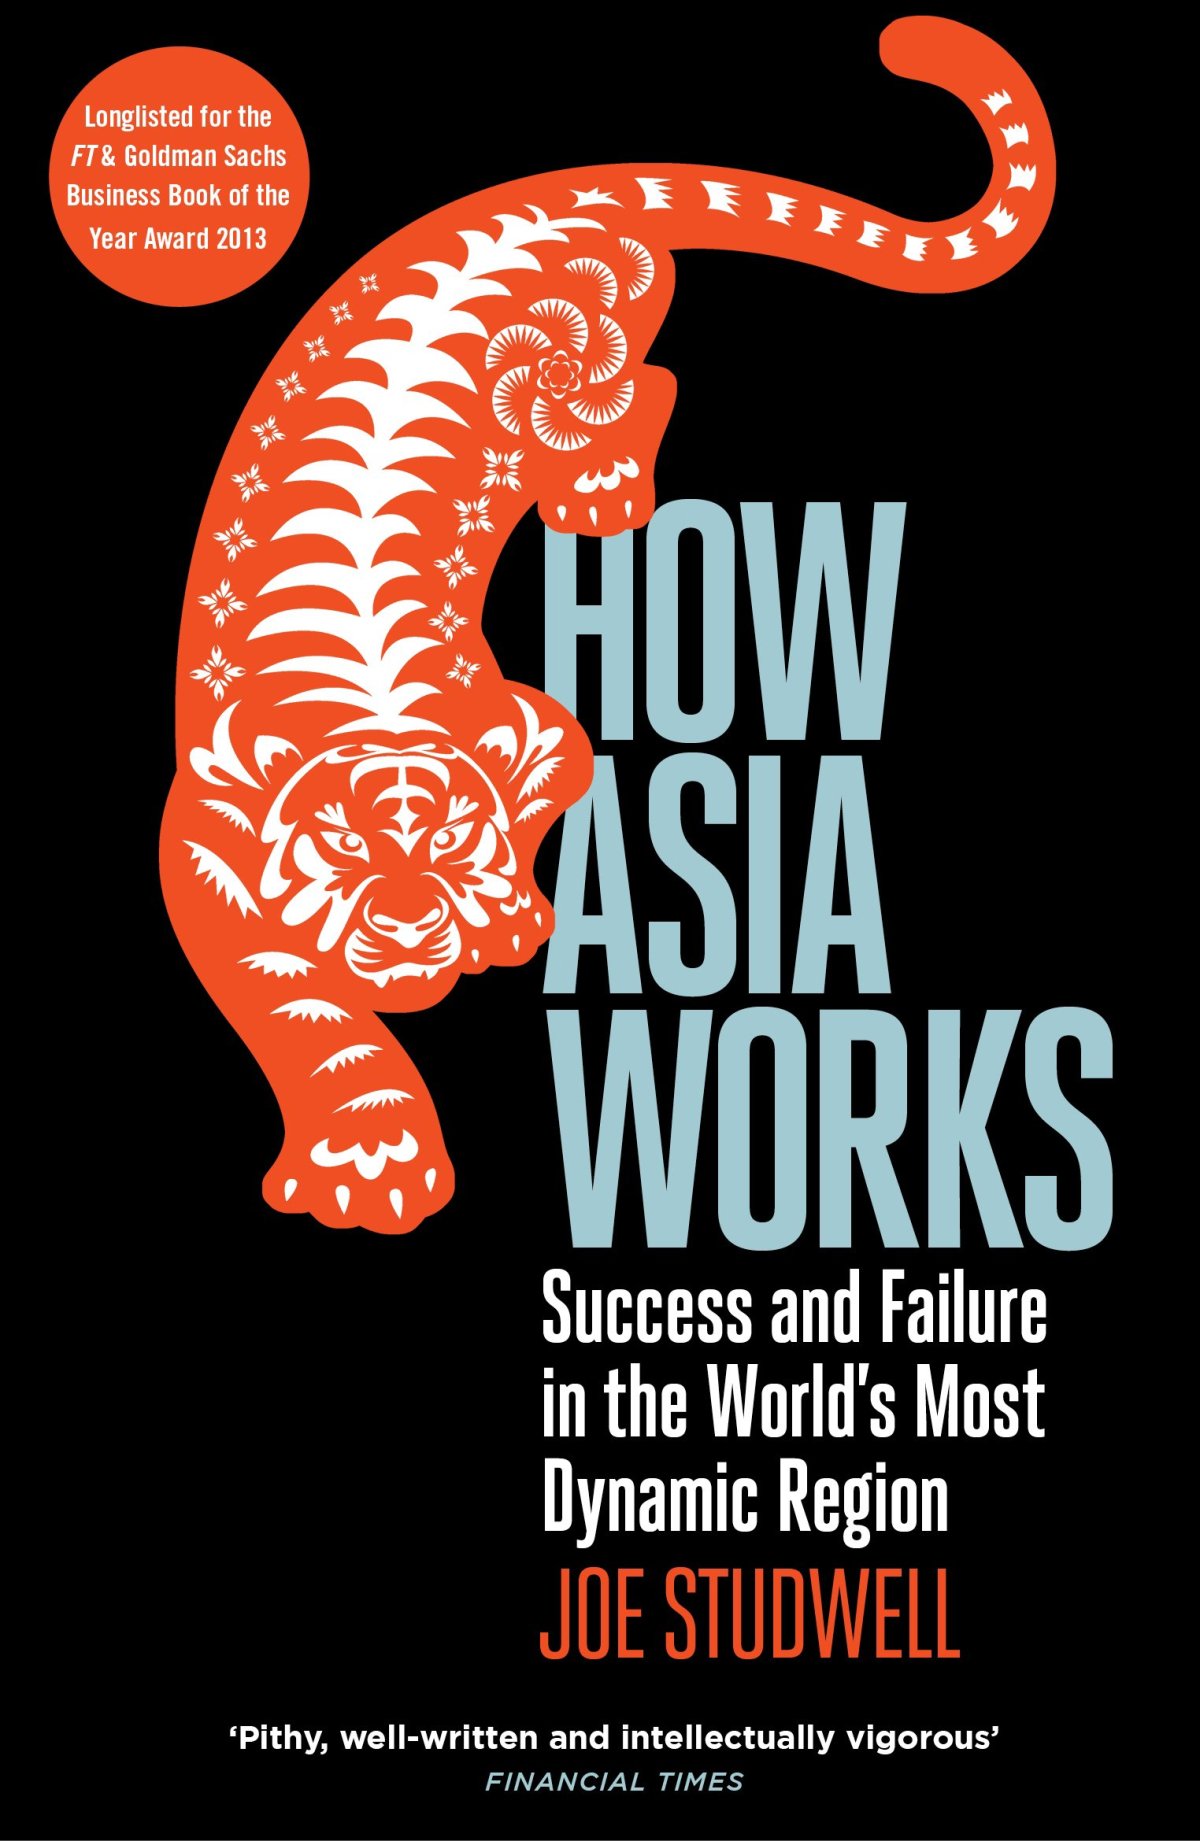 Thoughts on Joe Studwell’s ‘How Asia Works’